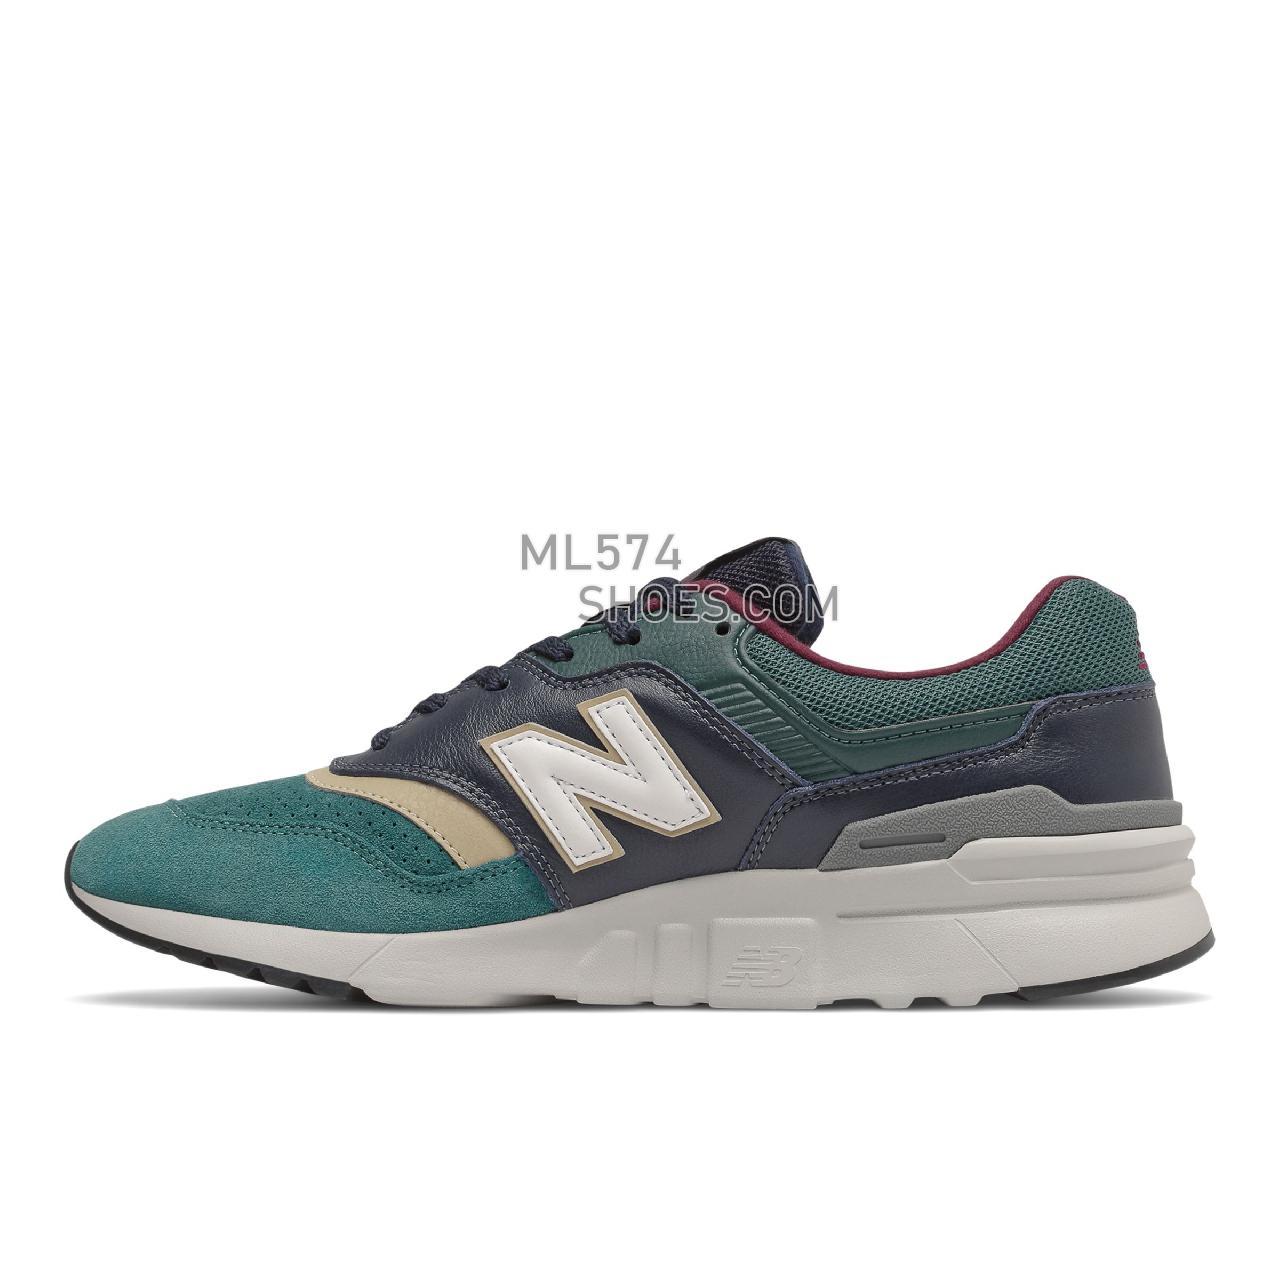 New Balance 997H - Men's Classic Sneakers - Navy with Teal - CM997HWC